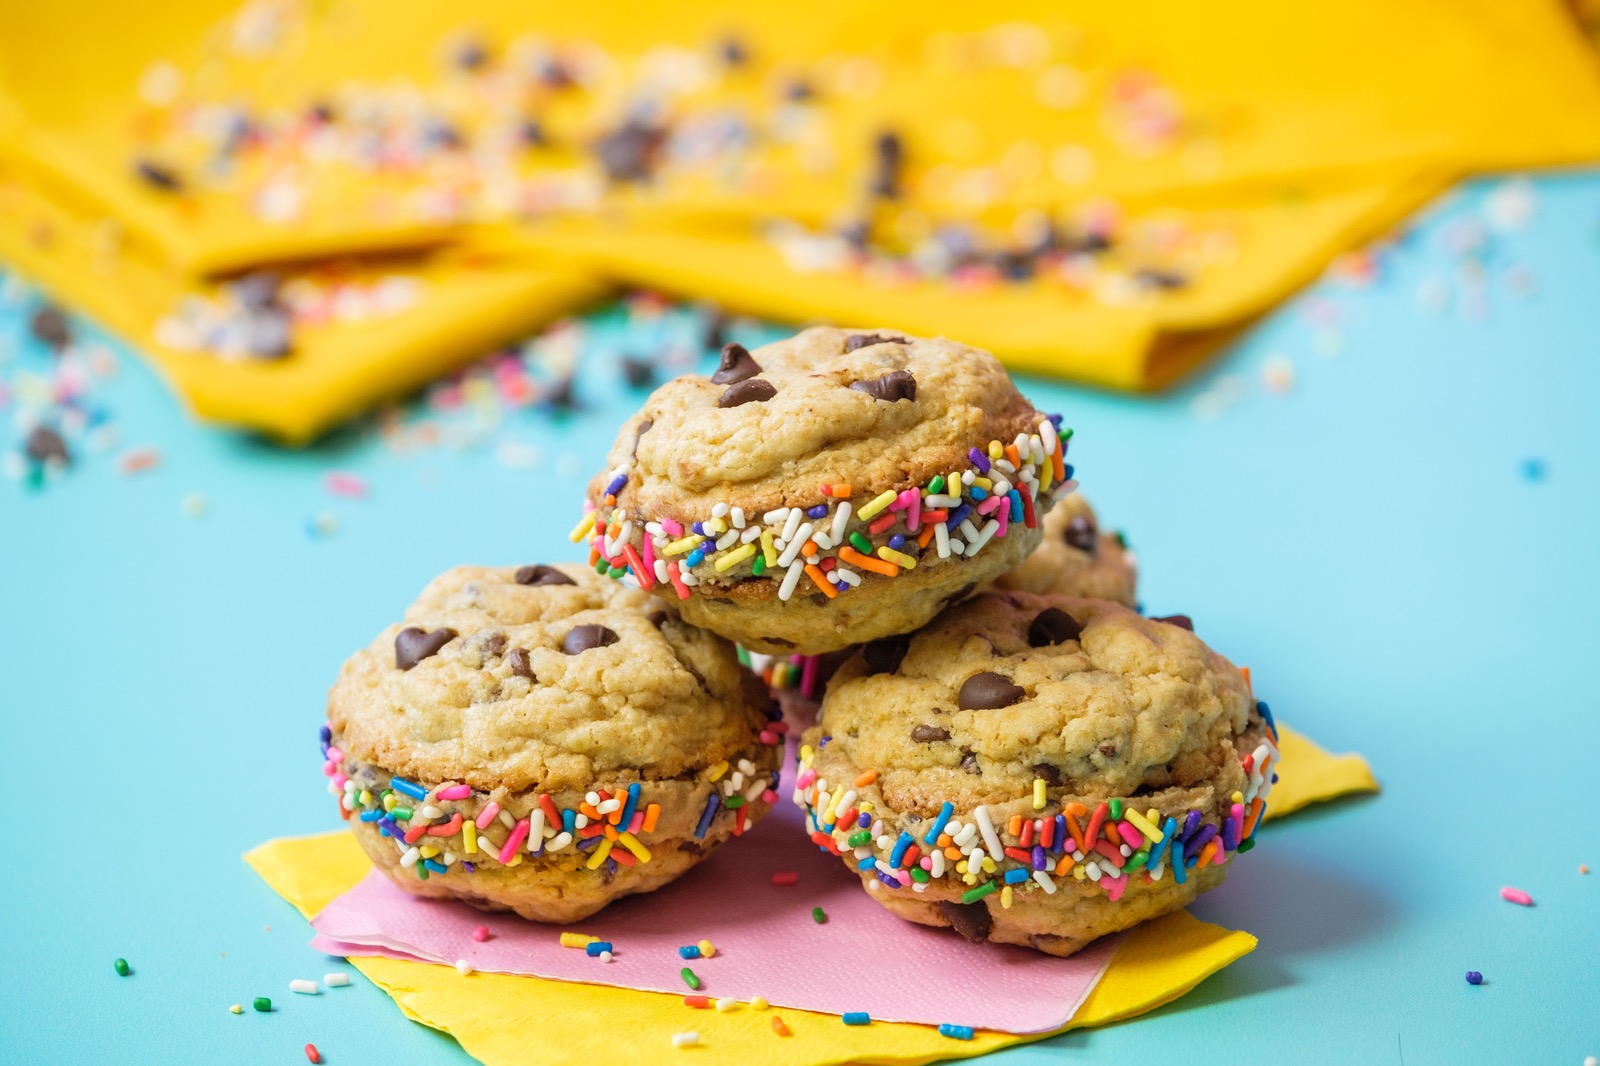 What C Drink Are You? Chocolate Chip Cookies with Sprinkles